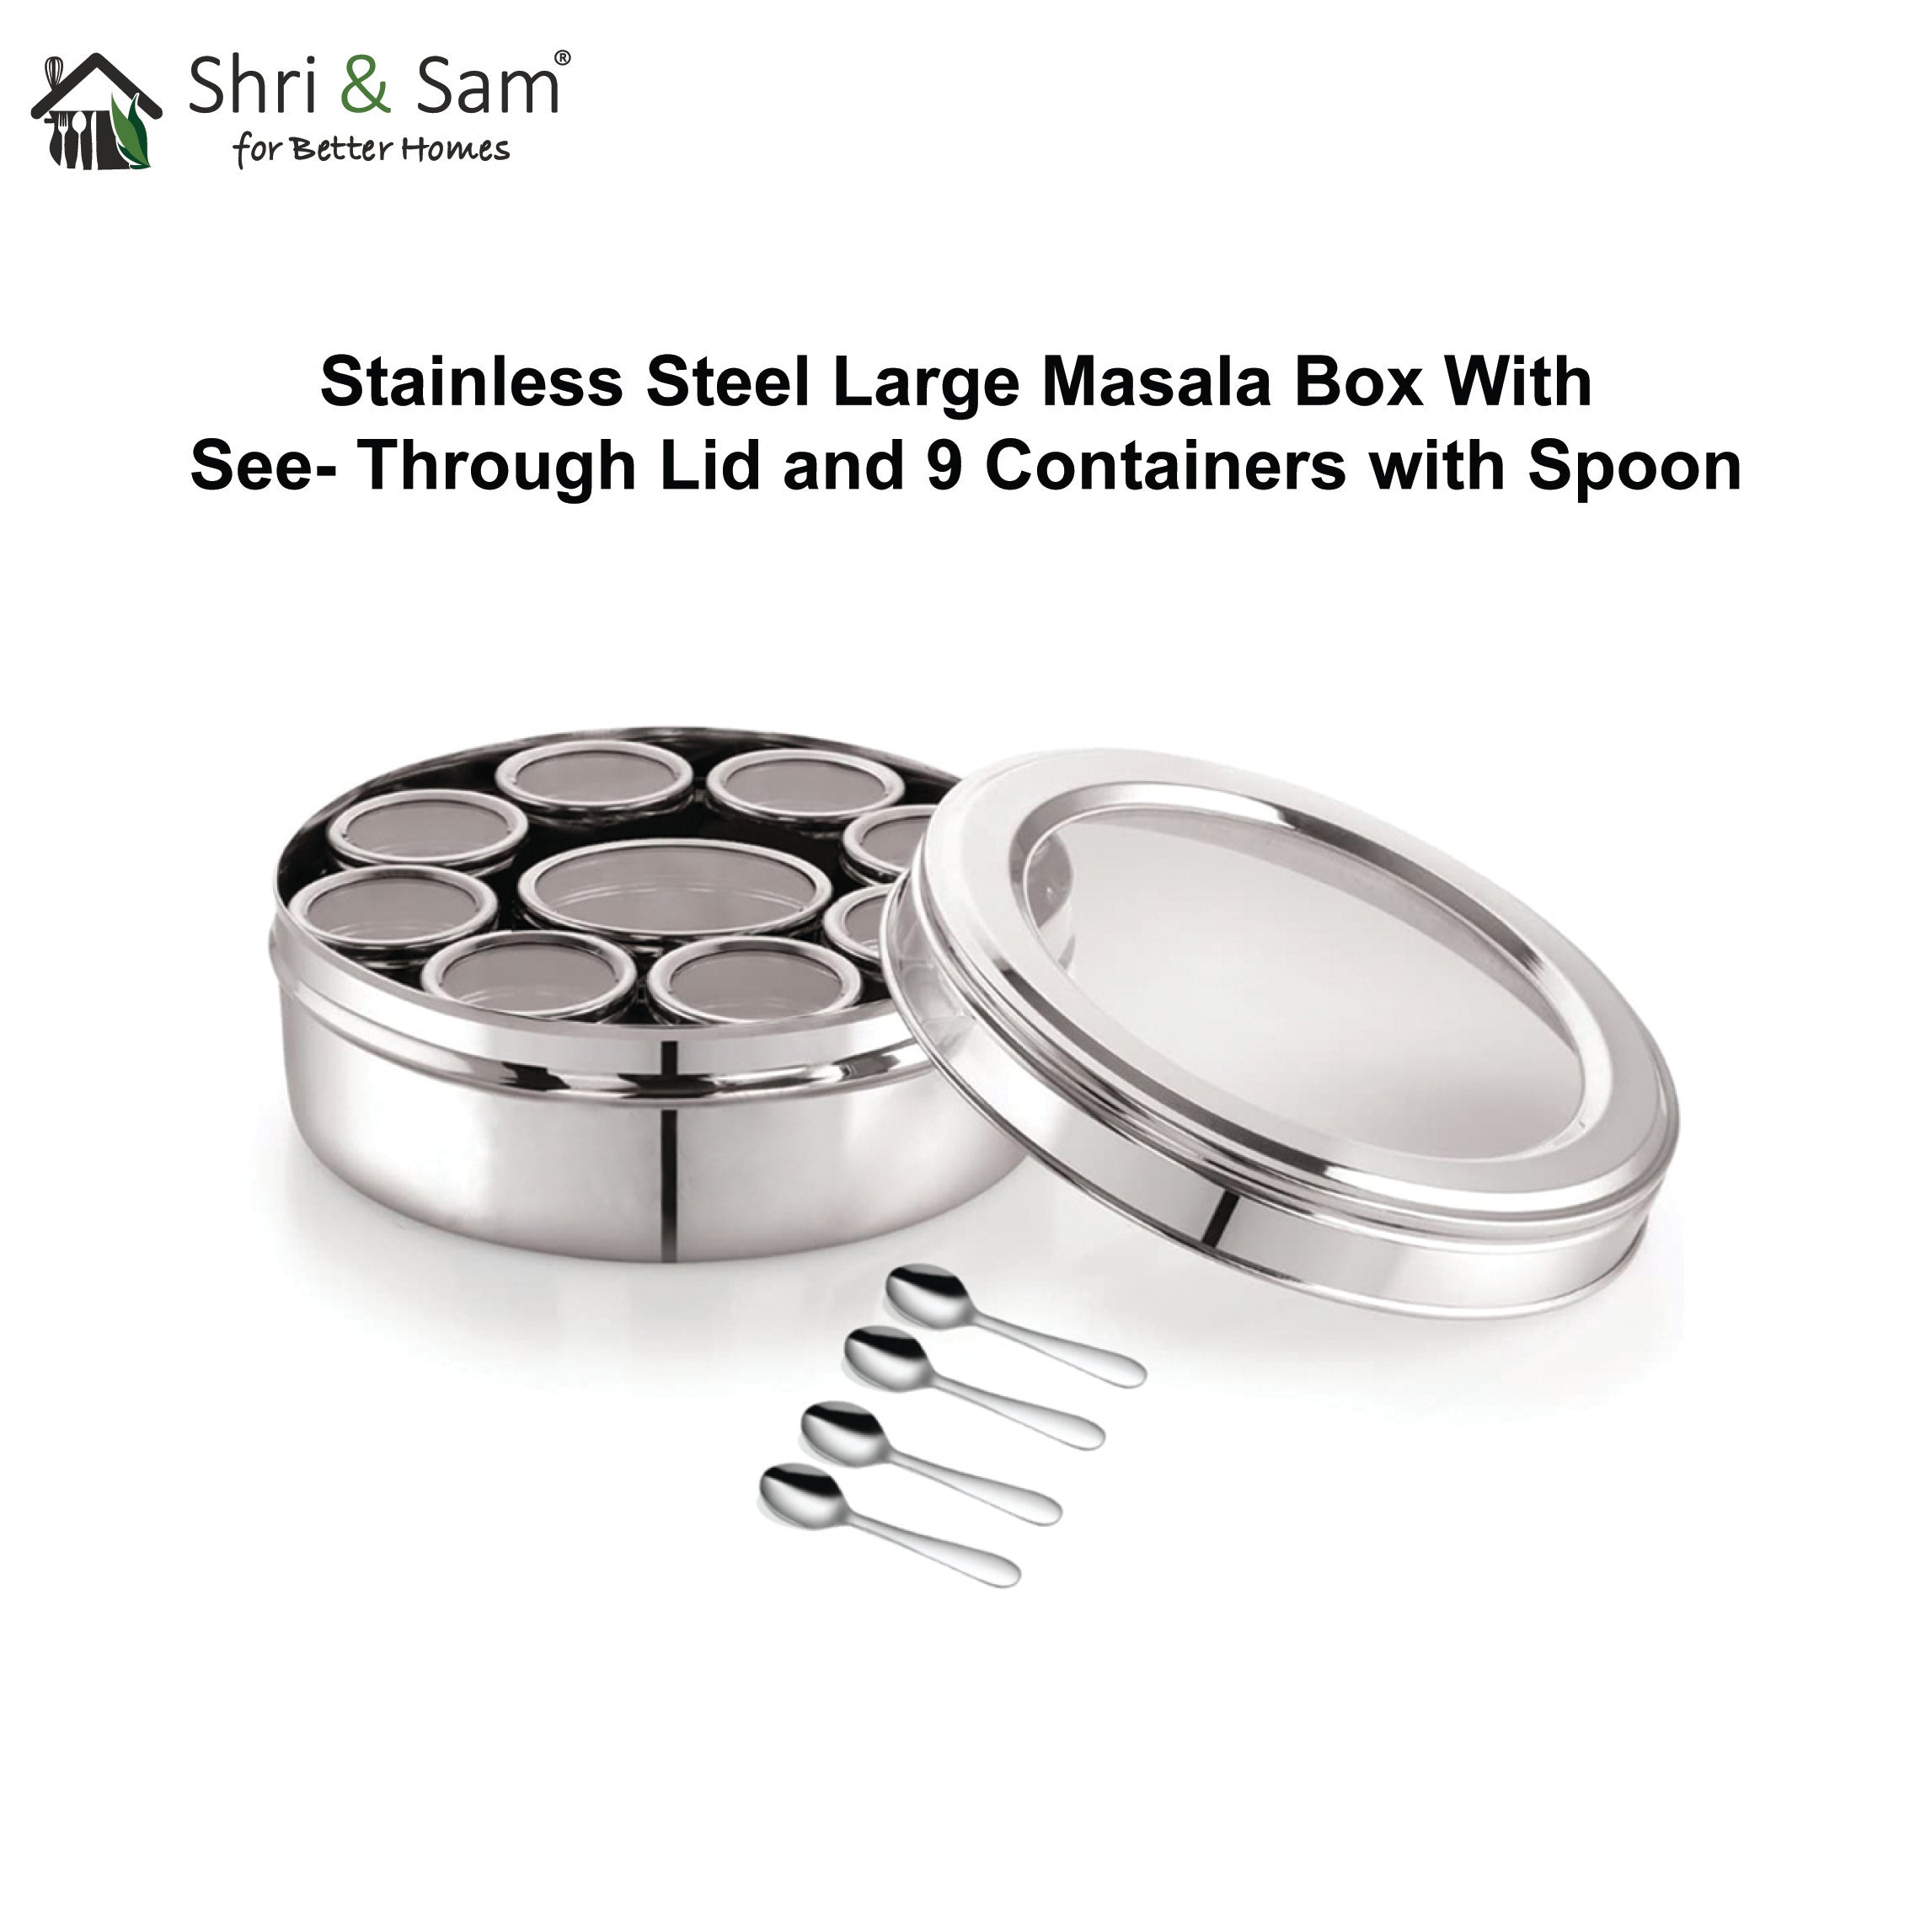 Stainless Steel Large Masala Box with See Through Lid and 9 Containers with Spoon